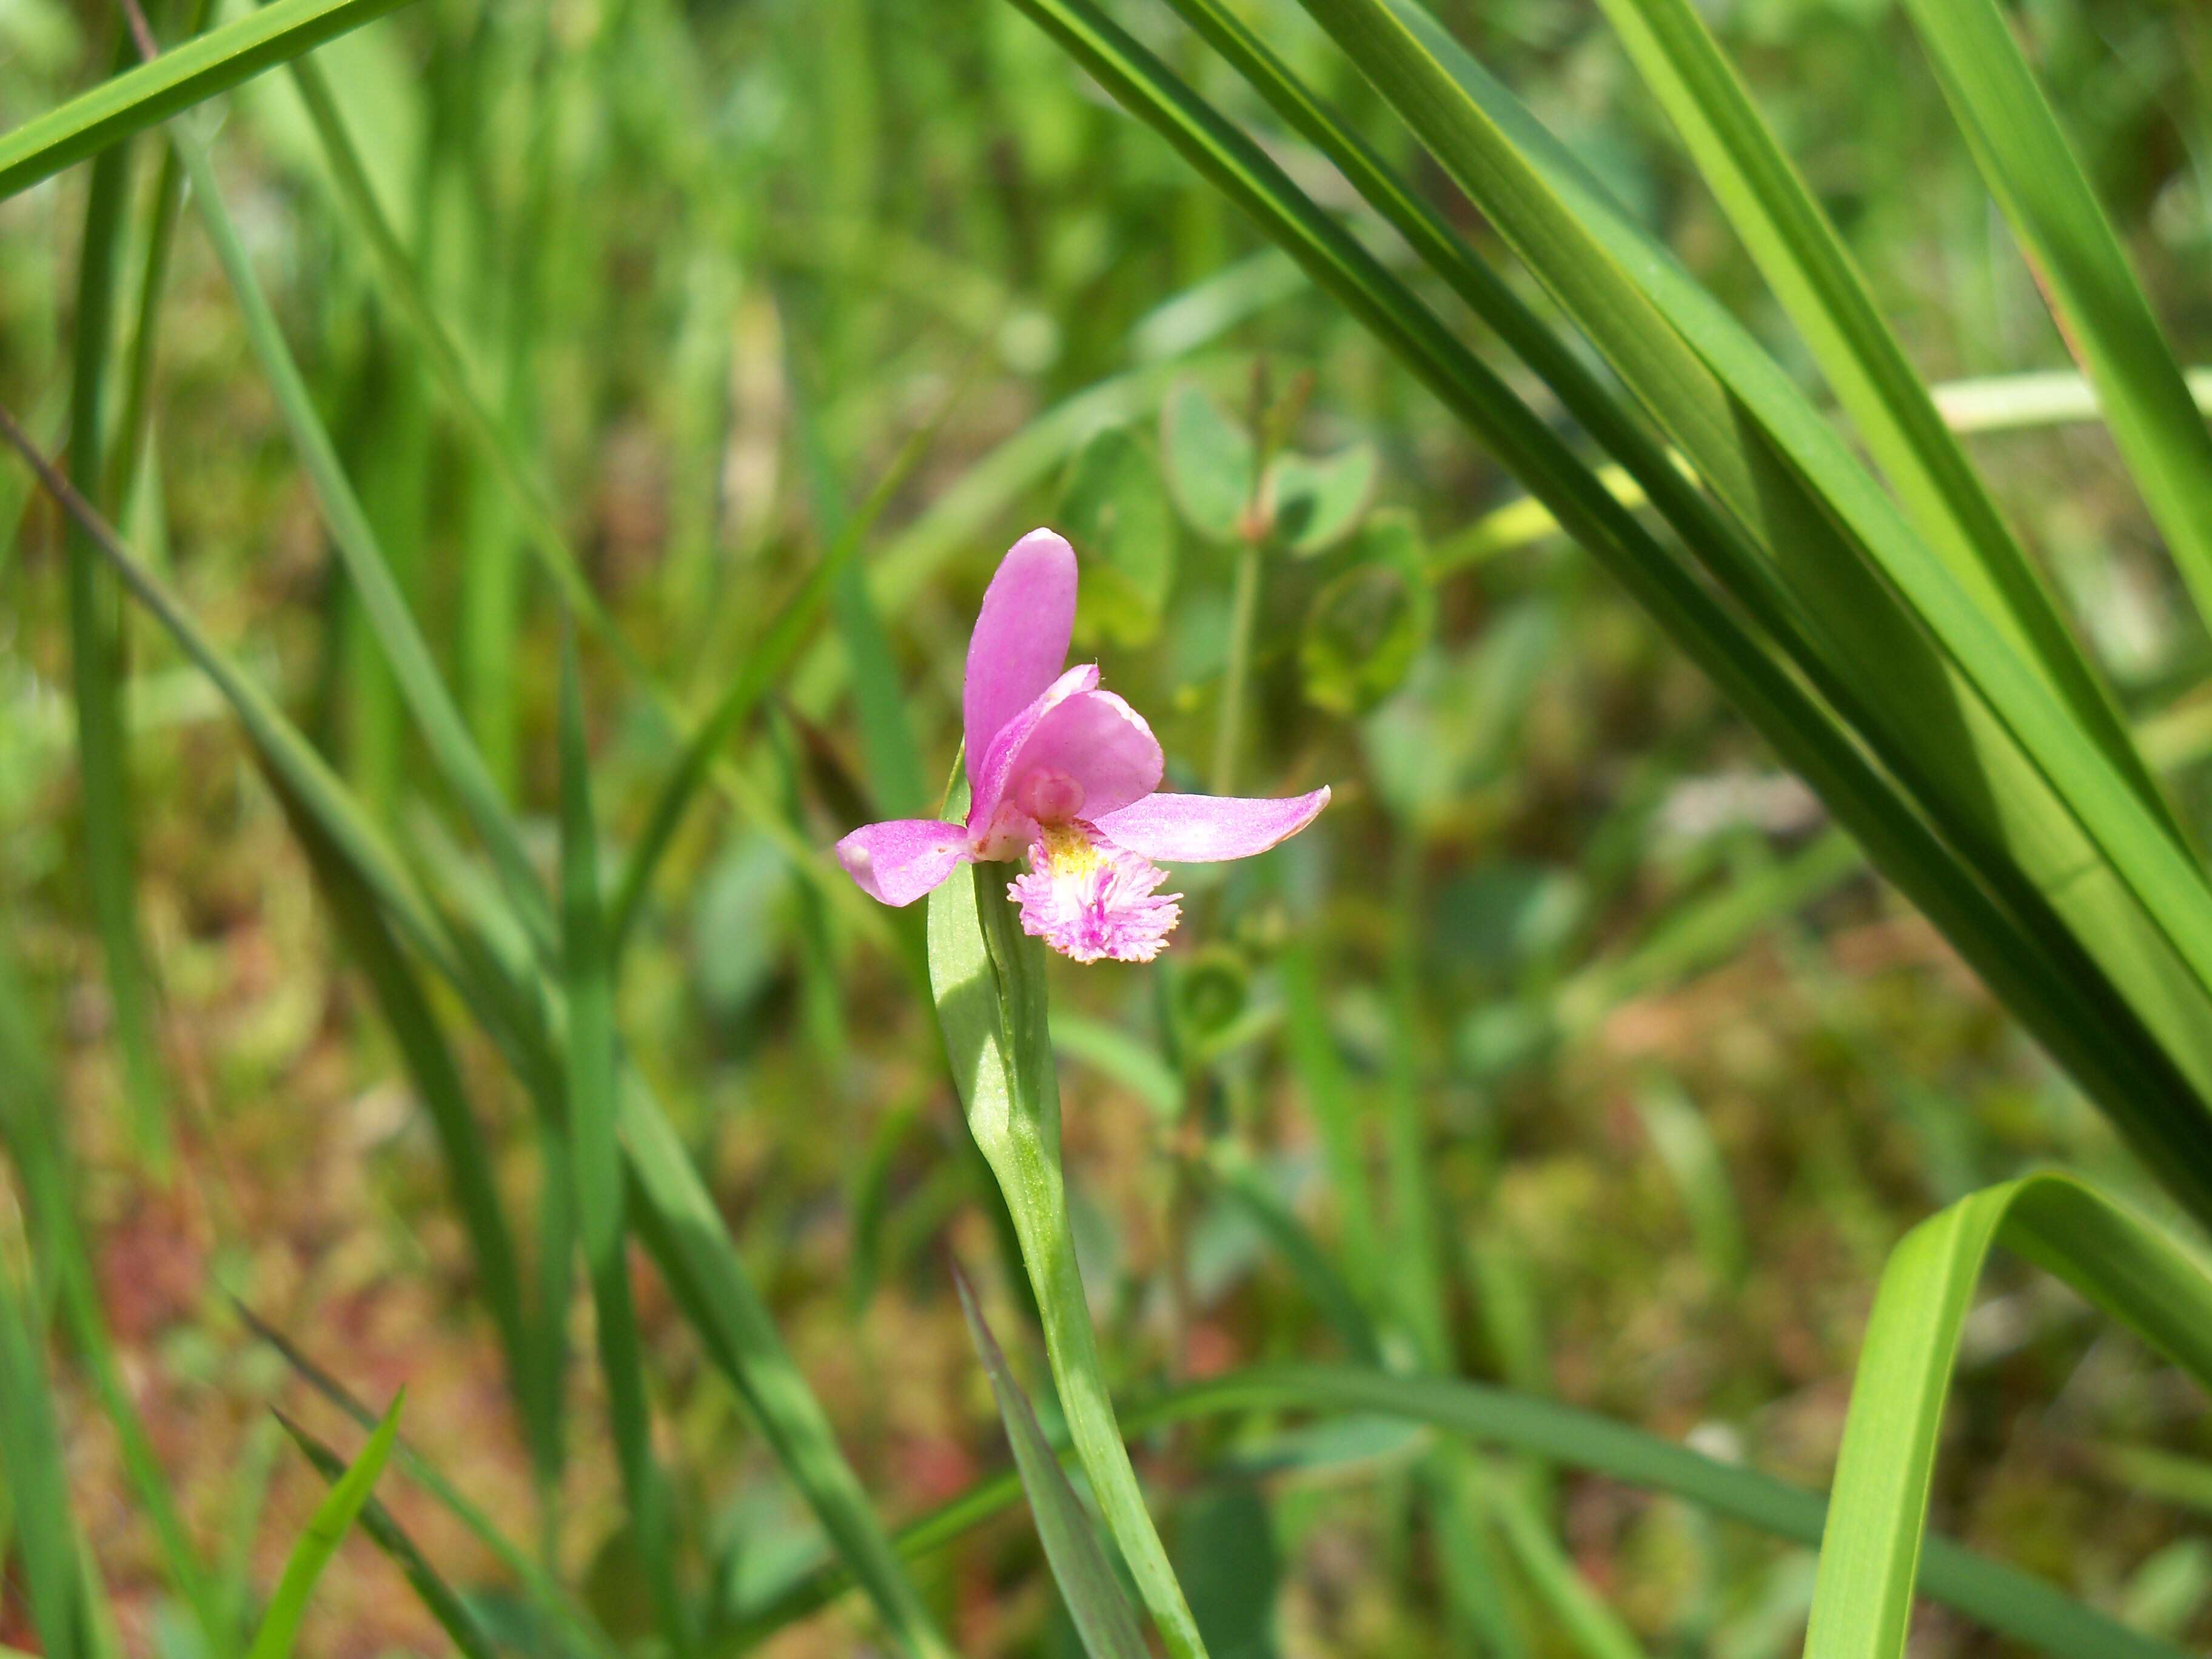 Image of snakemouth orchid